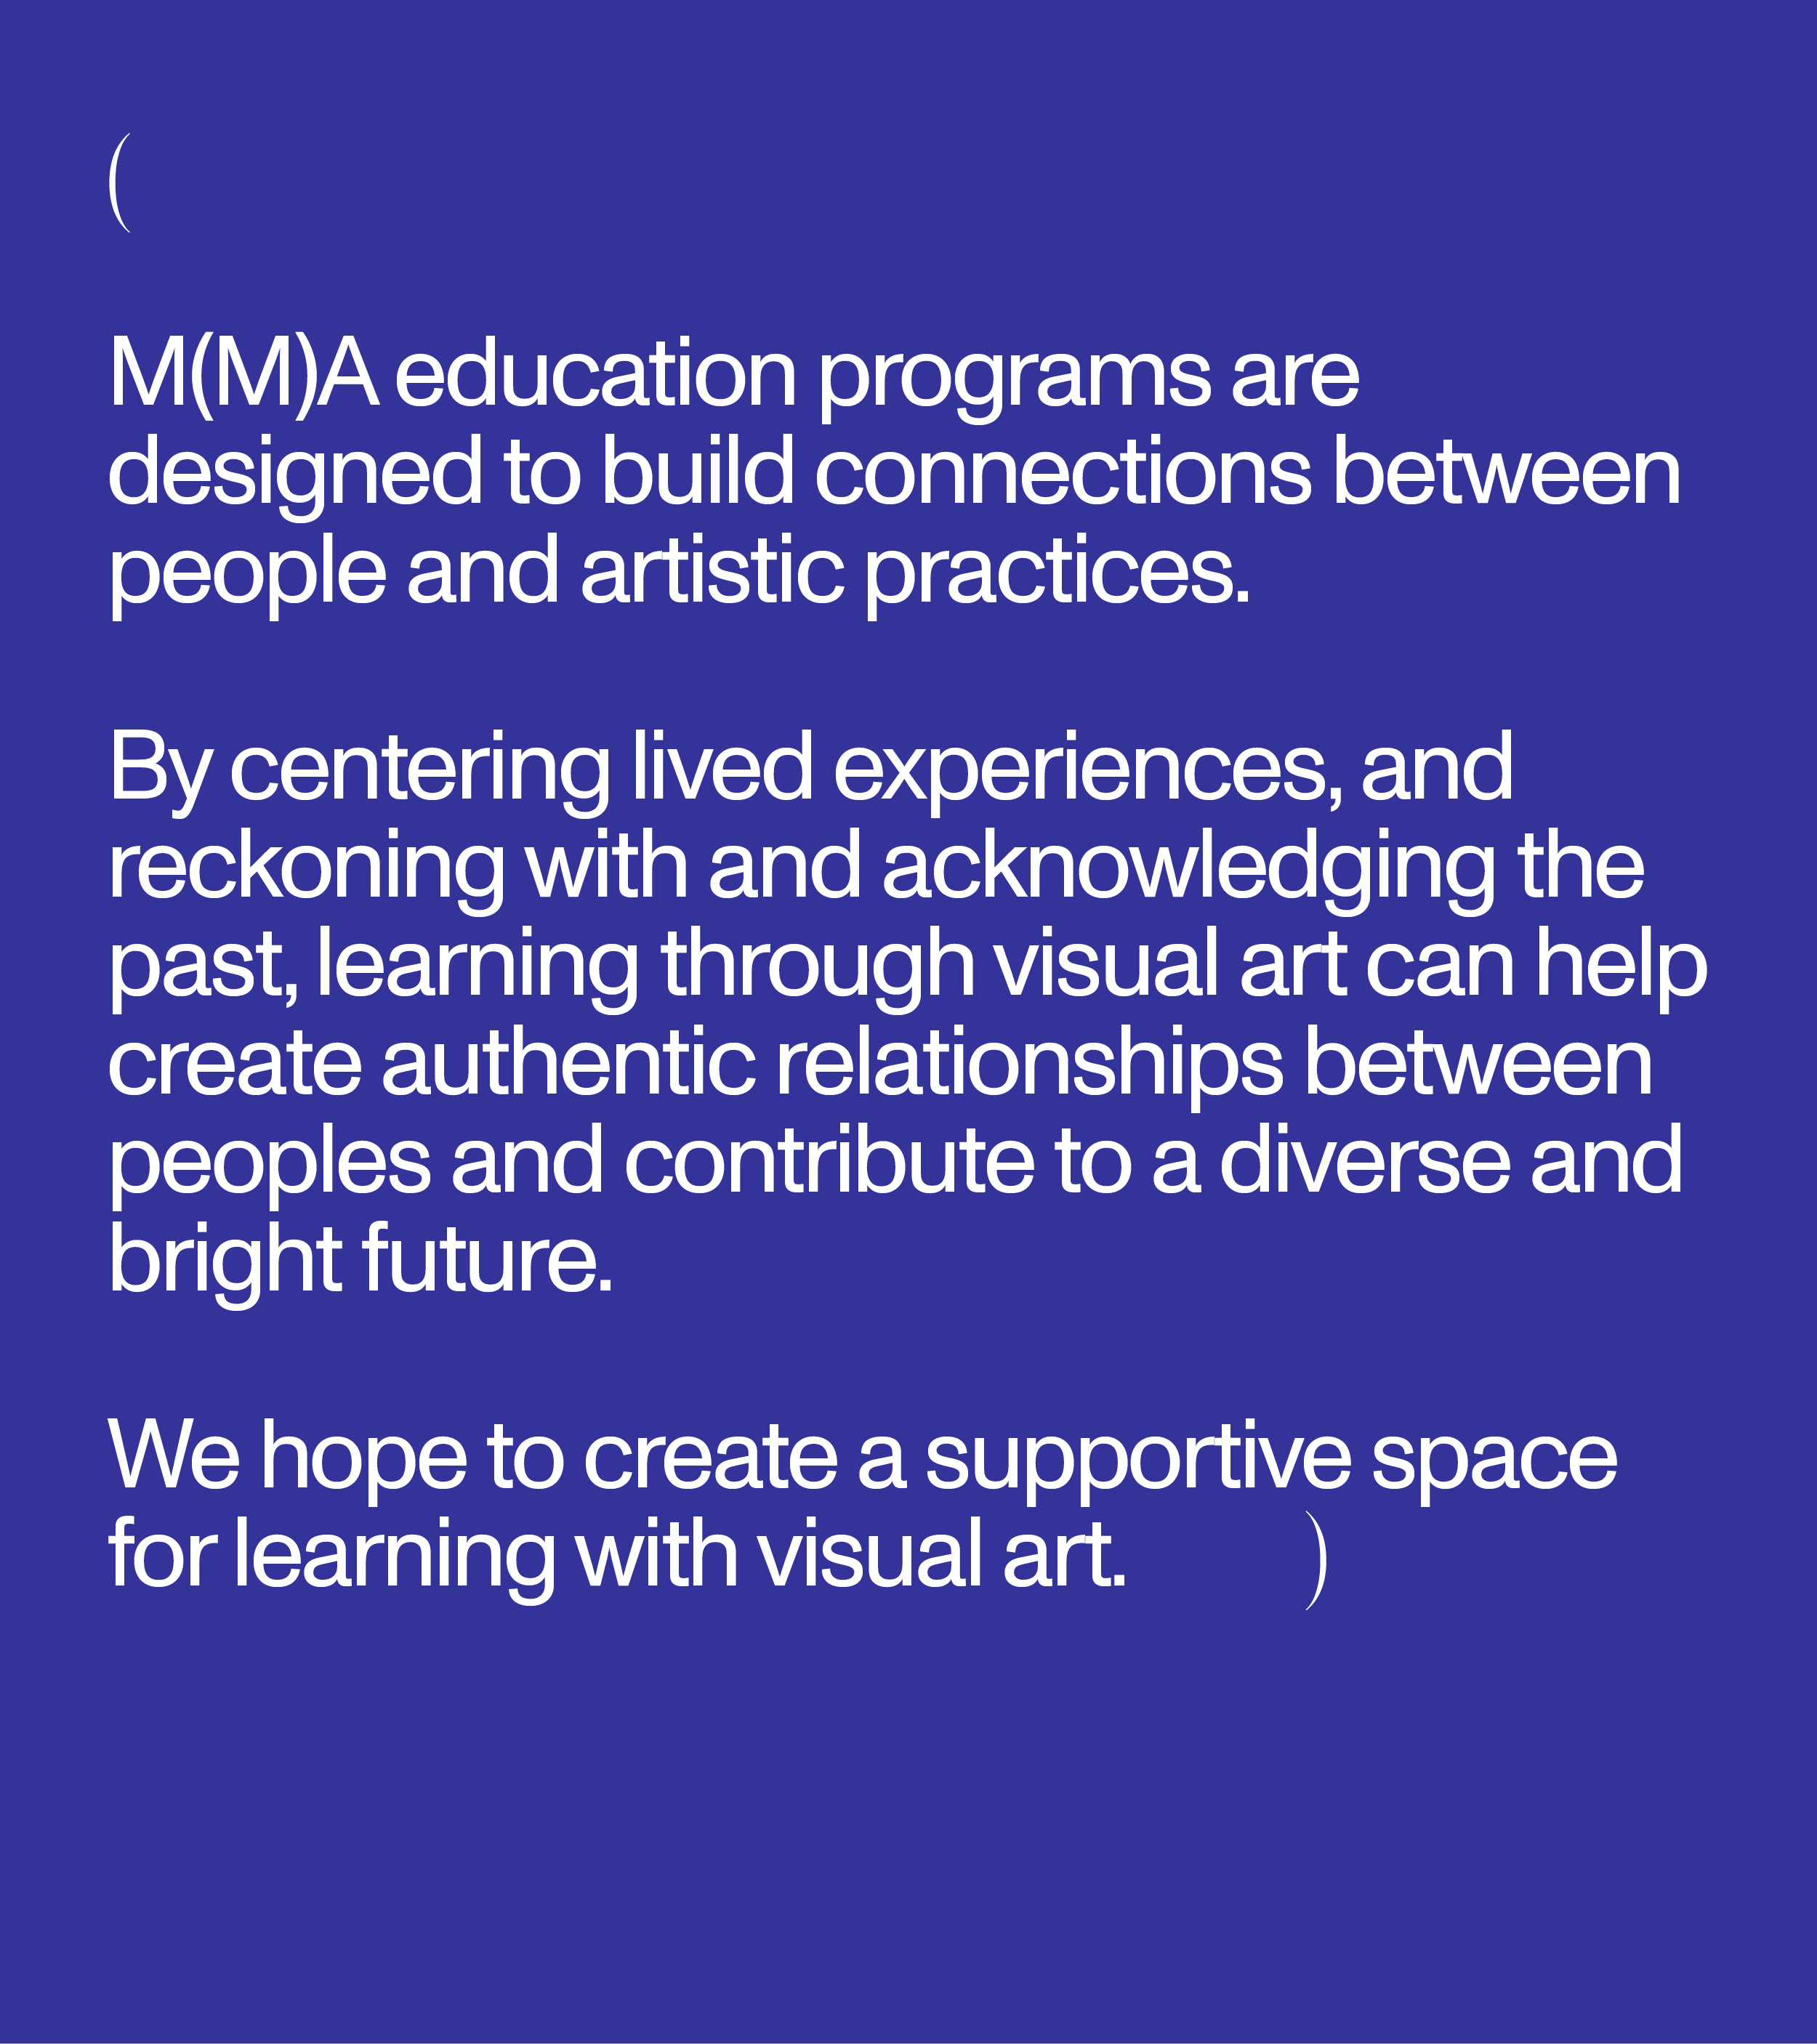 M(M)A education programs are designed to build connections between people and artistic practices. By centering lived experiences, and reckoning with and acknowledging the past, learning through visual art can help create authentic relationships between peoples and contribute to a diverse and bright future. We hope to create a supportive space for learning with visual art.